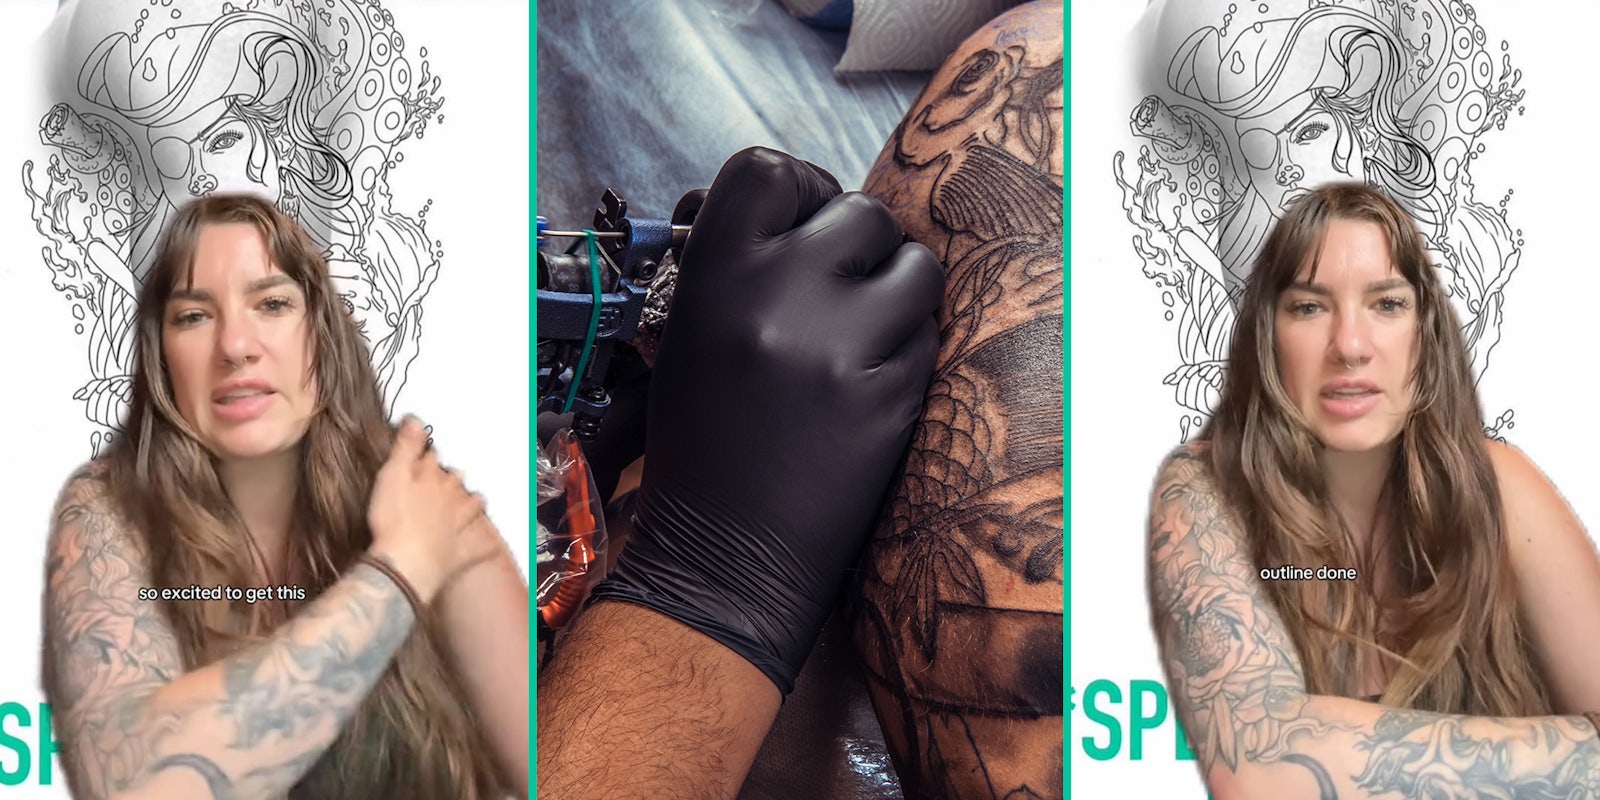 Customer says tattoo artist spent 6 hours applying stencil during a 5-hour session.